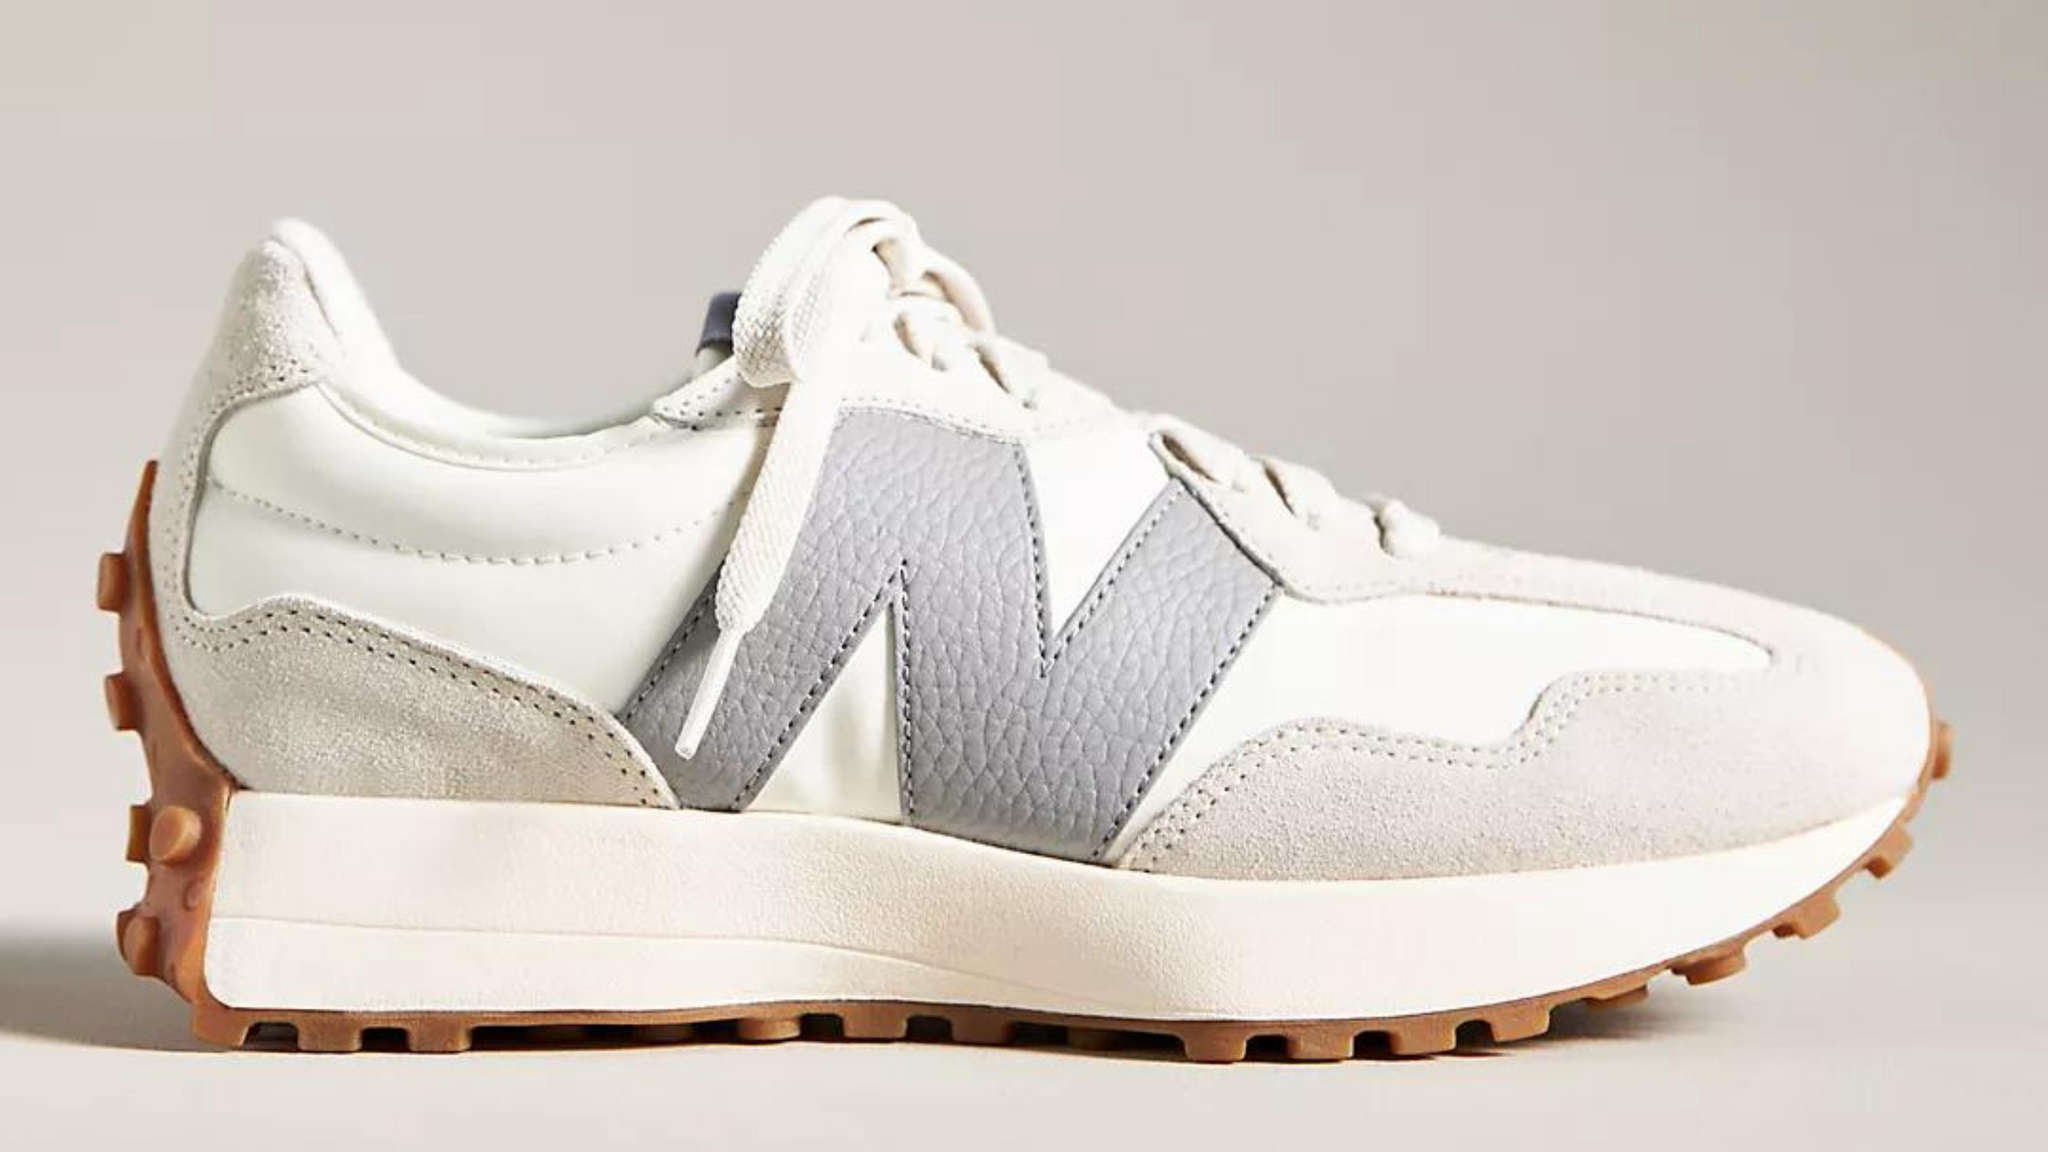 New Balance Sneakers Christmas Gifts for Moms